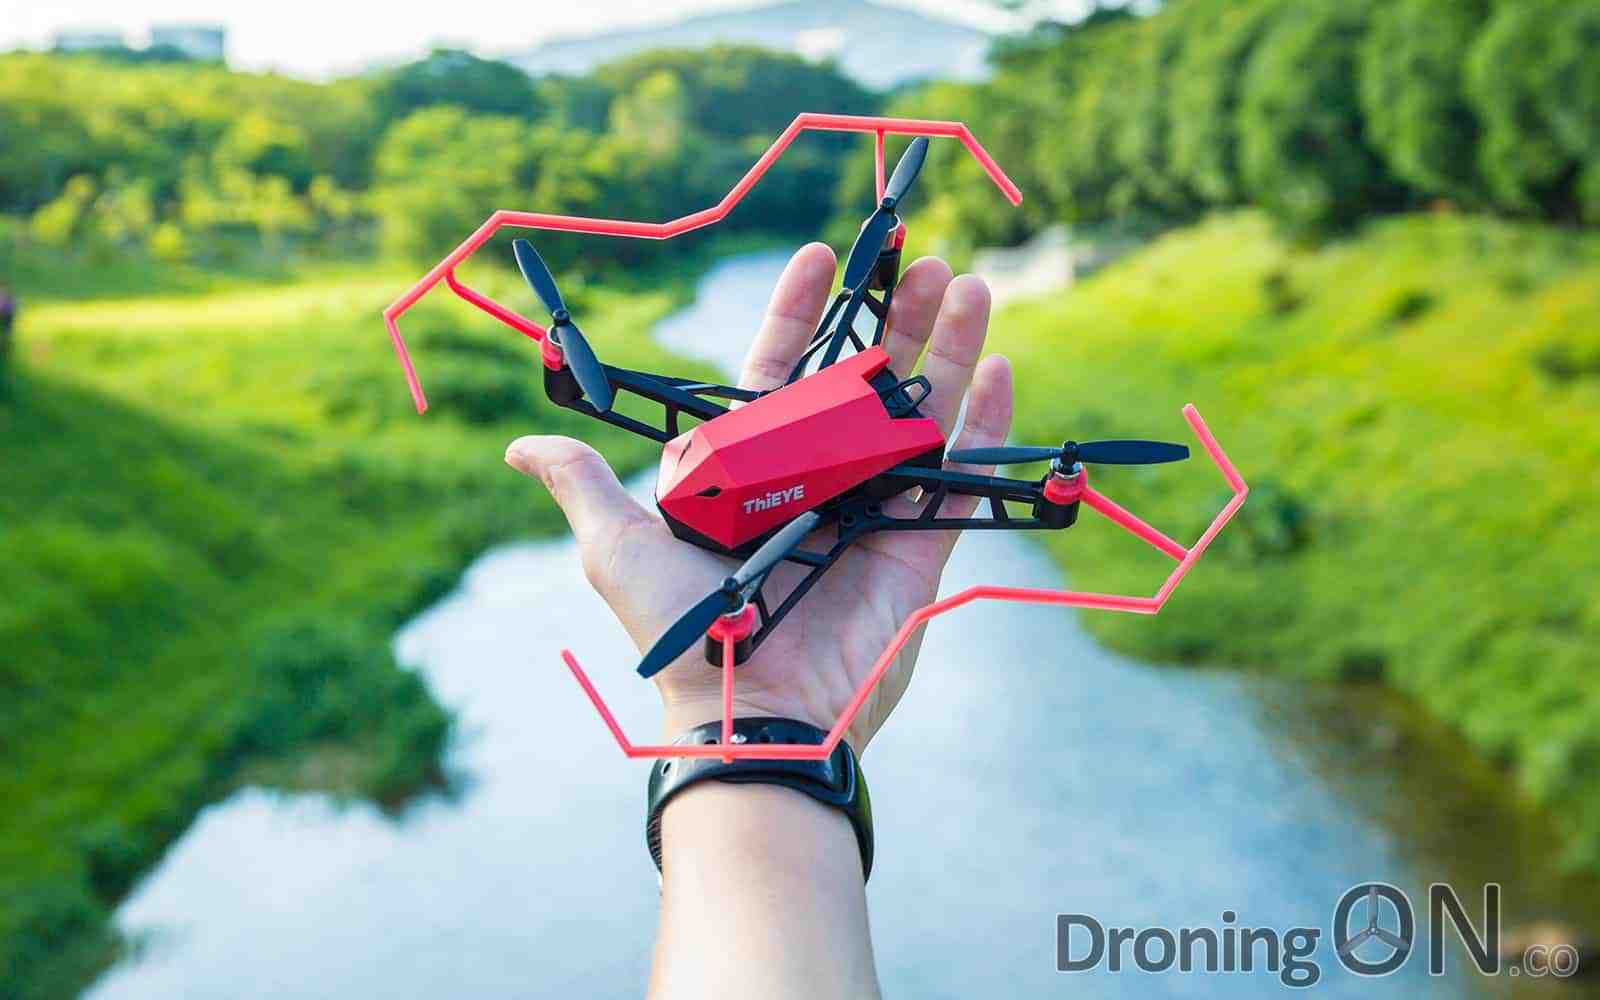 The reinvented Kudrone, now branded as ThiEye Dr X drone.